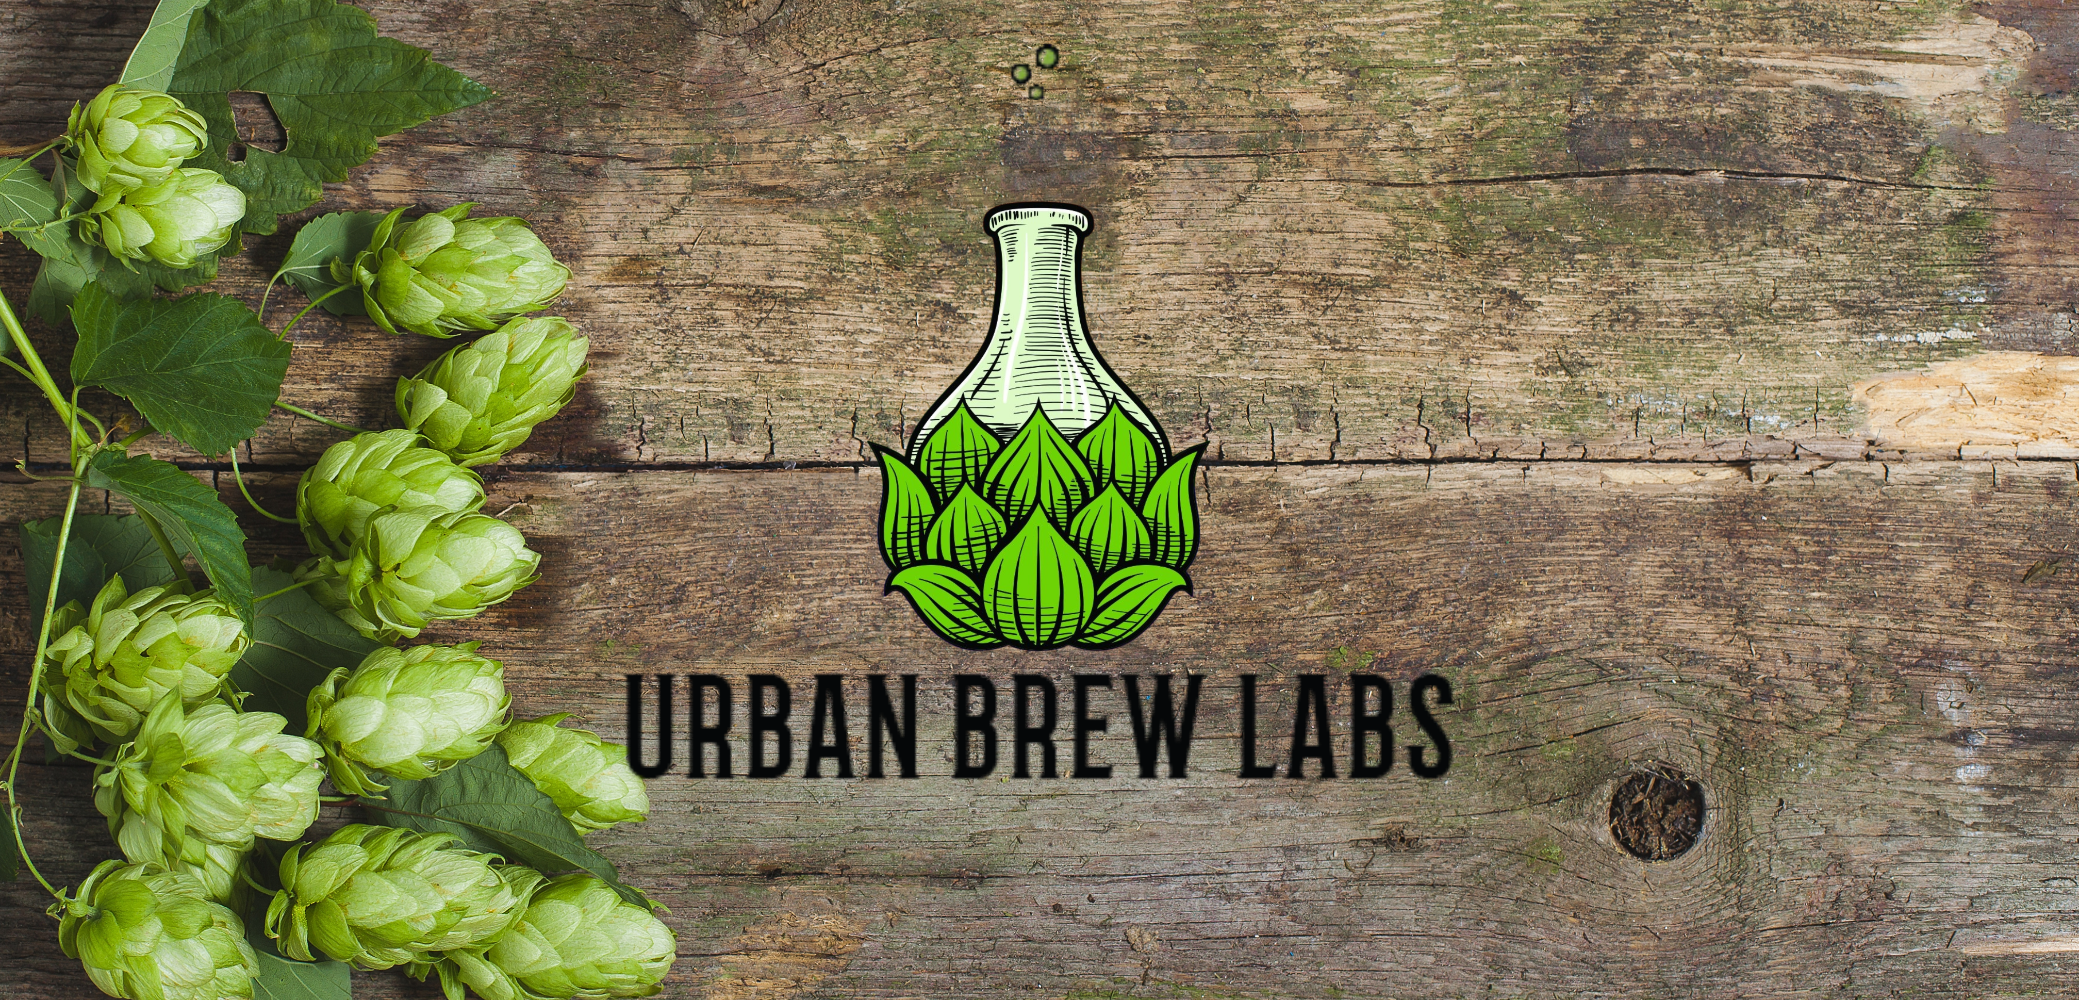 Urban Brew Labs Online Auction - 15 BBL Brewhouse, (7) Fermenters, Boiler, Keg Washer, Grain Mill, Support & More